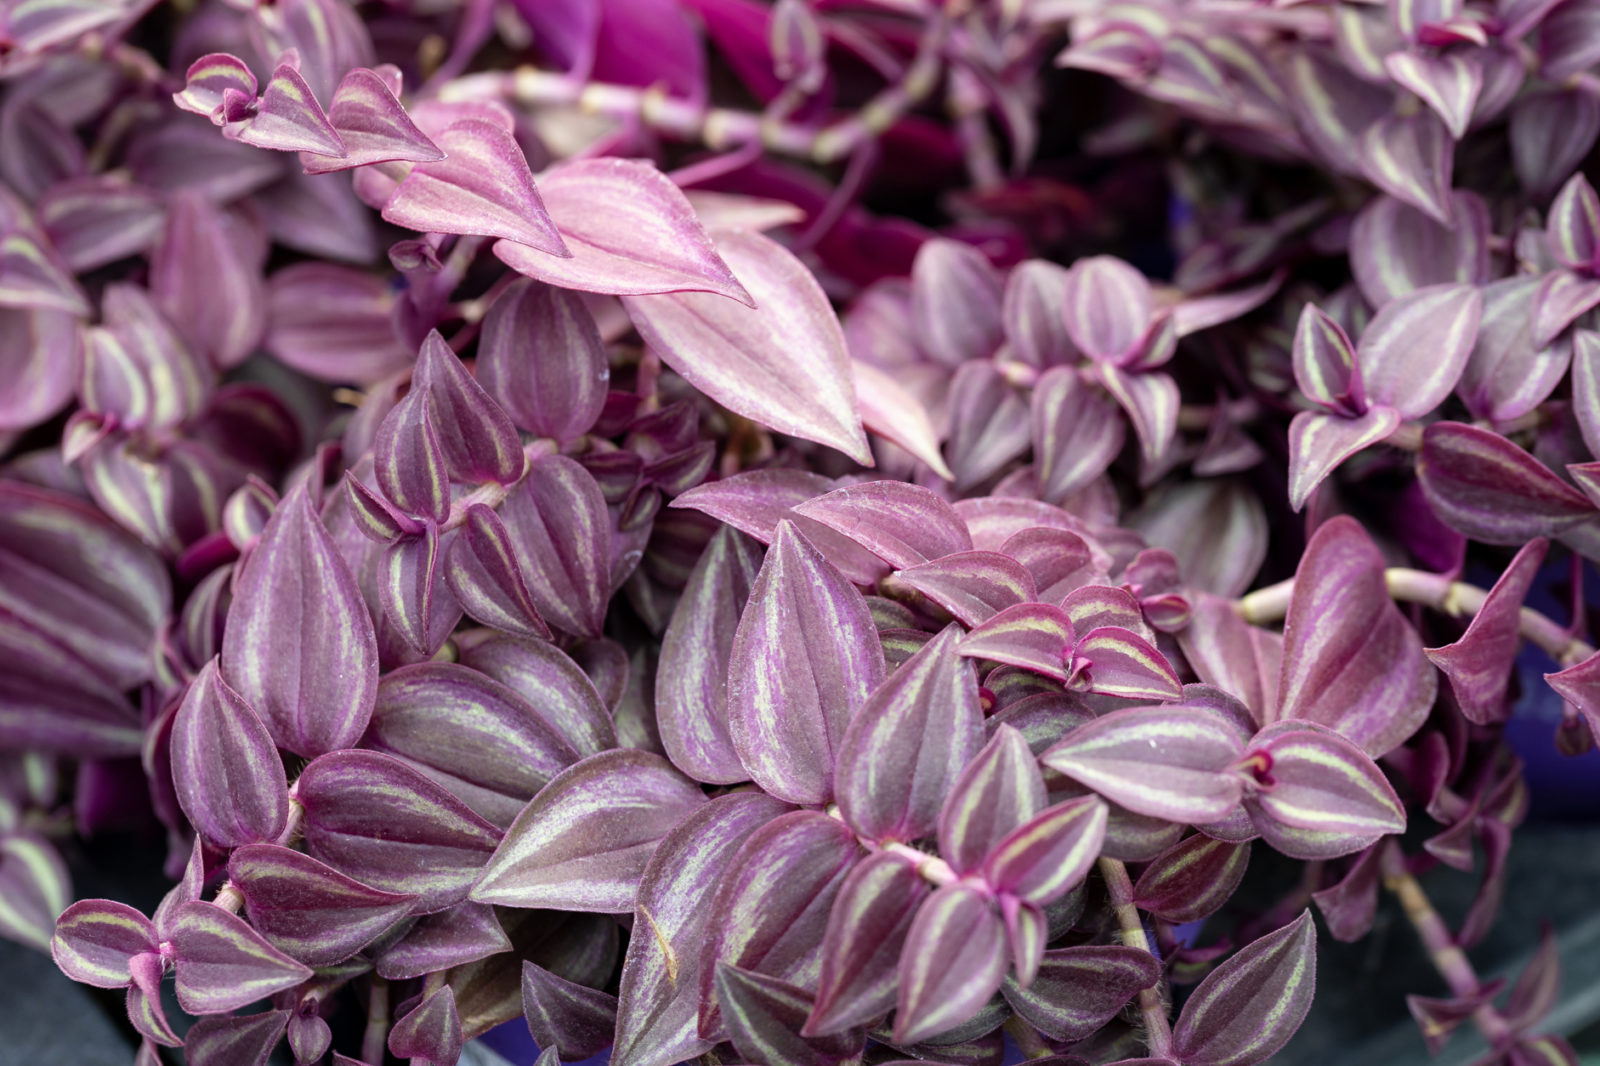 What is a green purple leaf plant called?